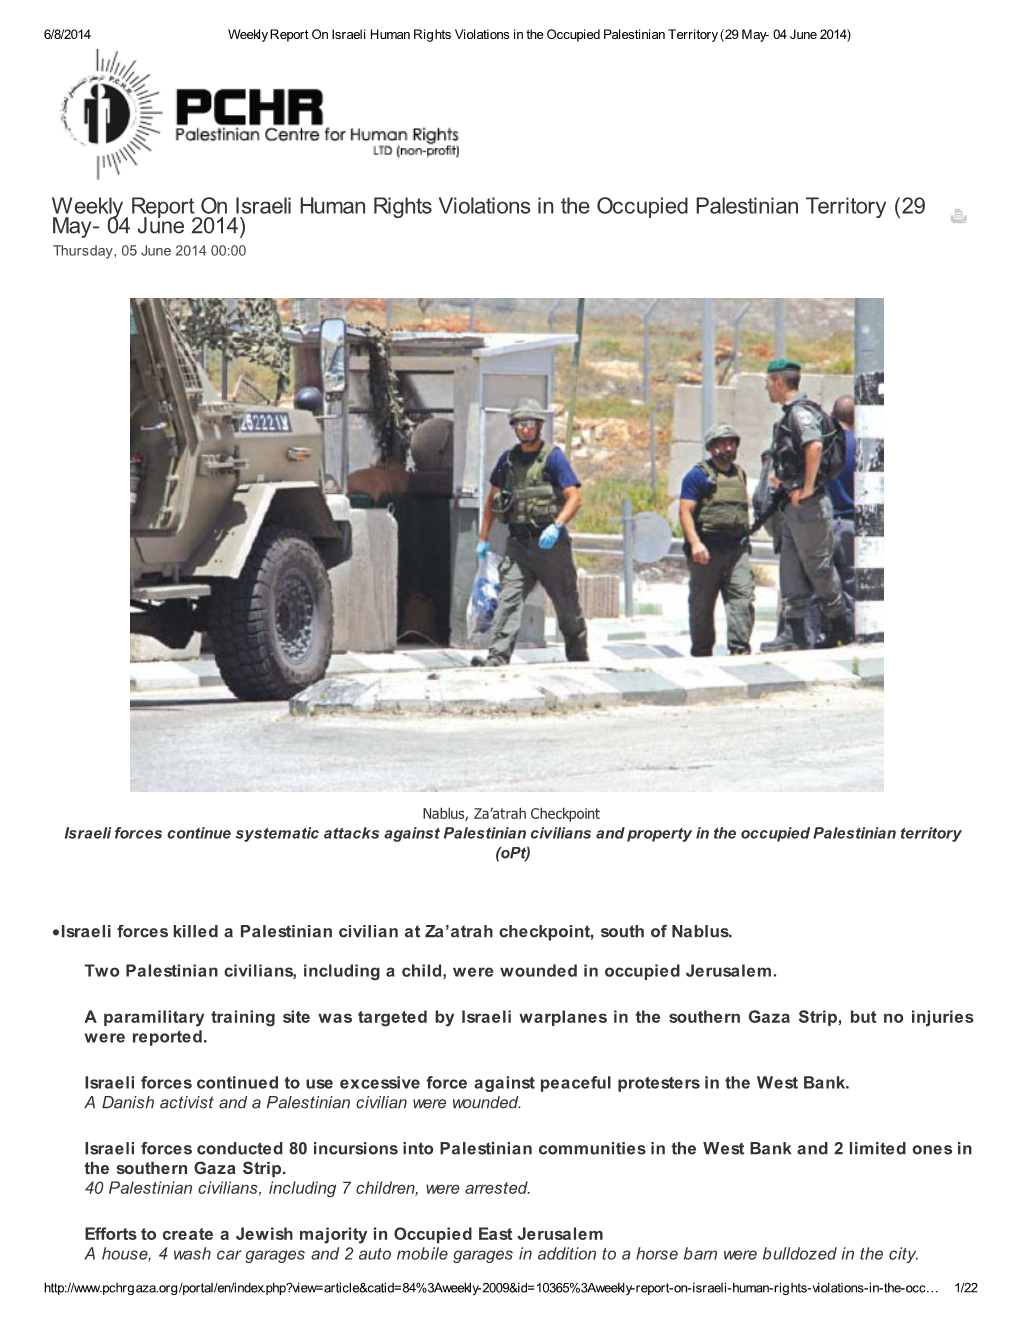 Weekly Report on Israeli Human Rights Violations in the Occupied Palestinian Territory (29 May- 04 June 2014)